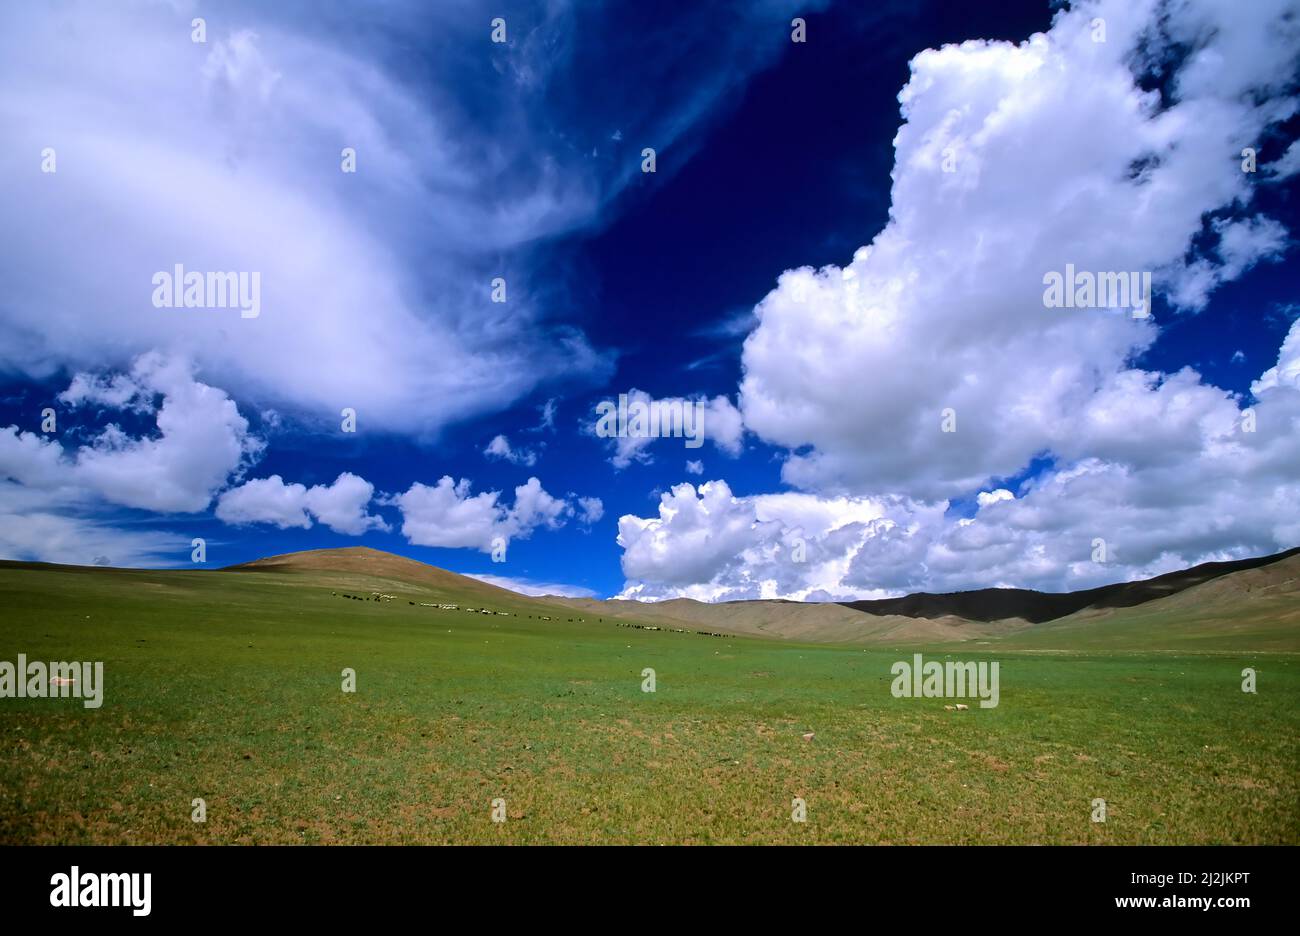 Mongolia. The immense sky and the deserted countryside. Stock Photo